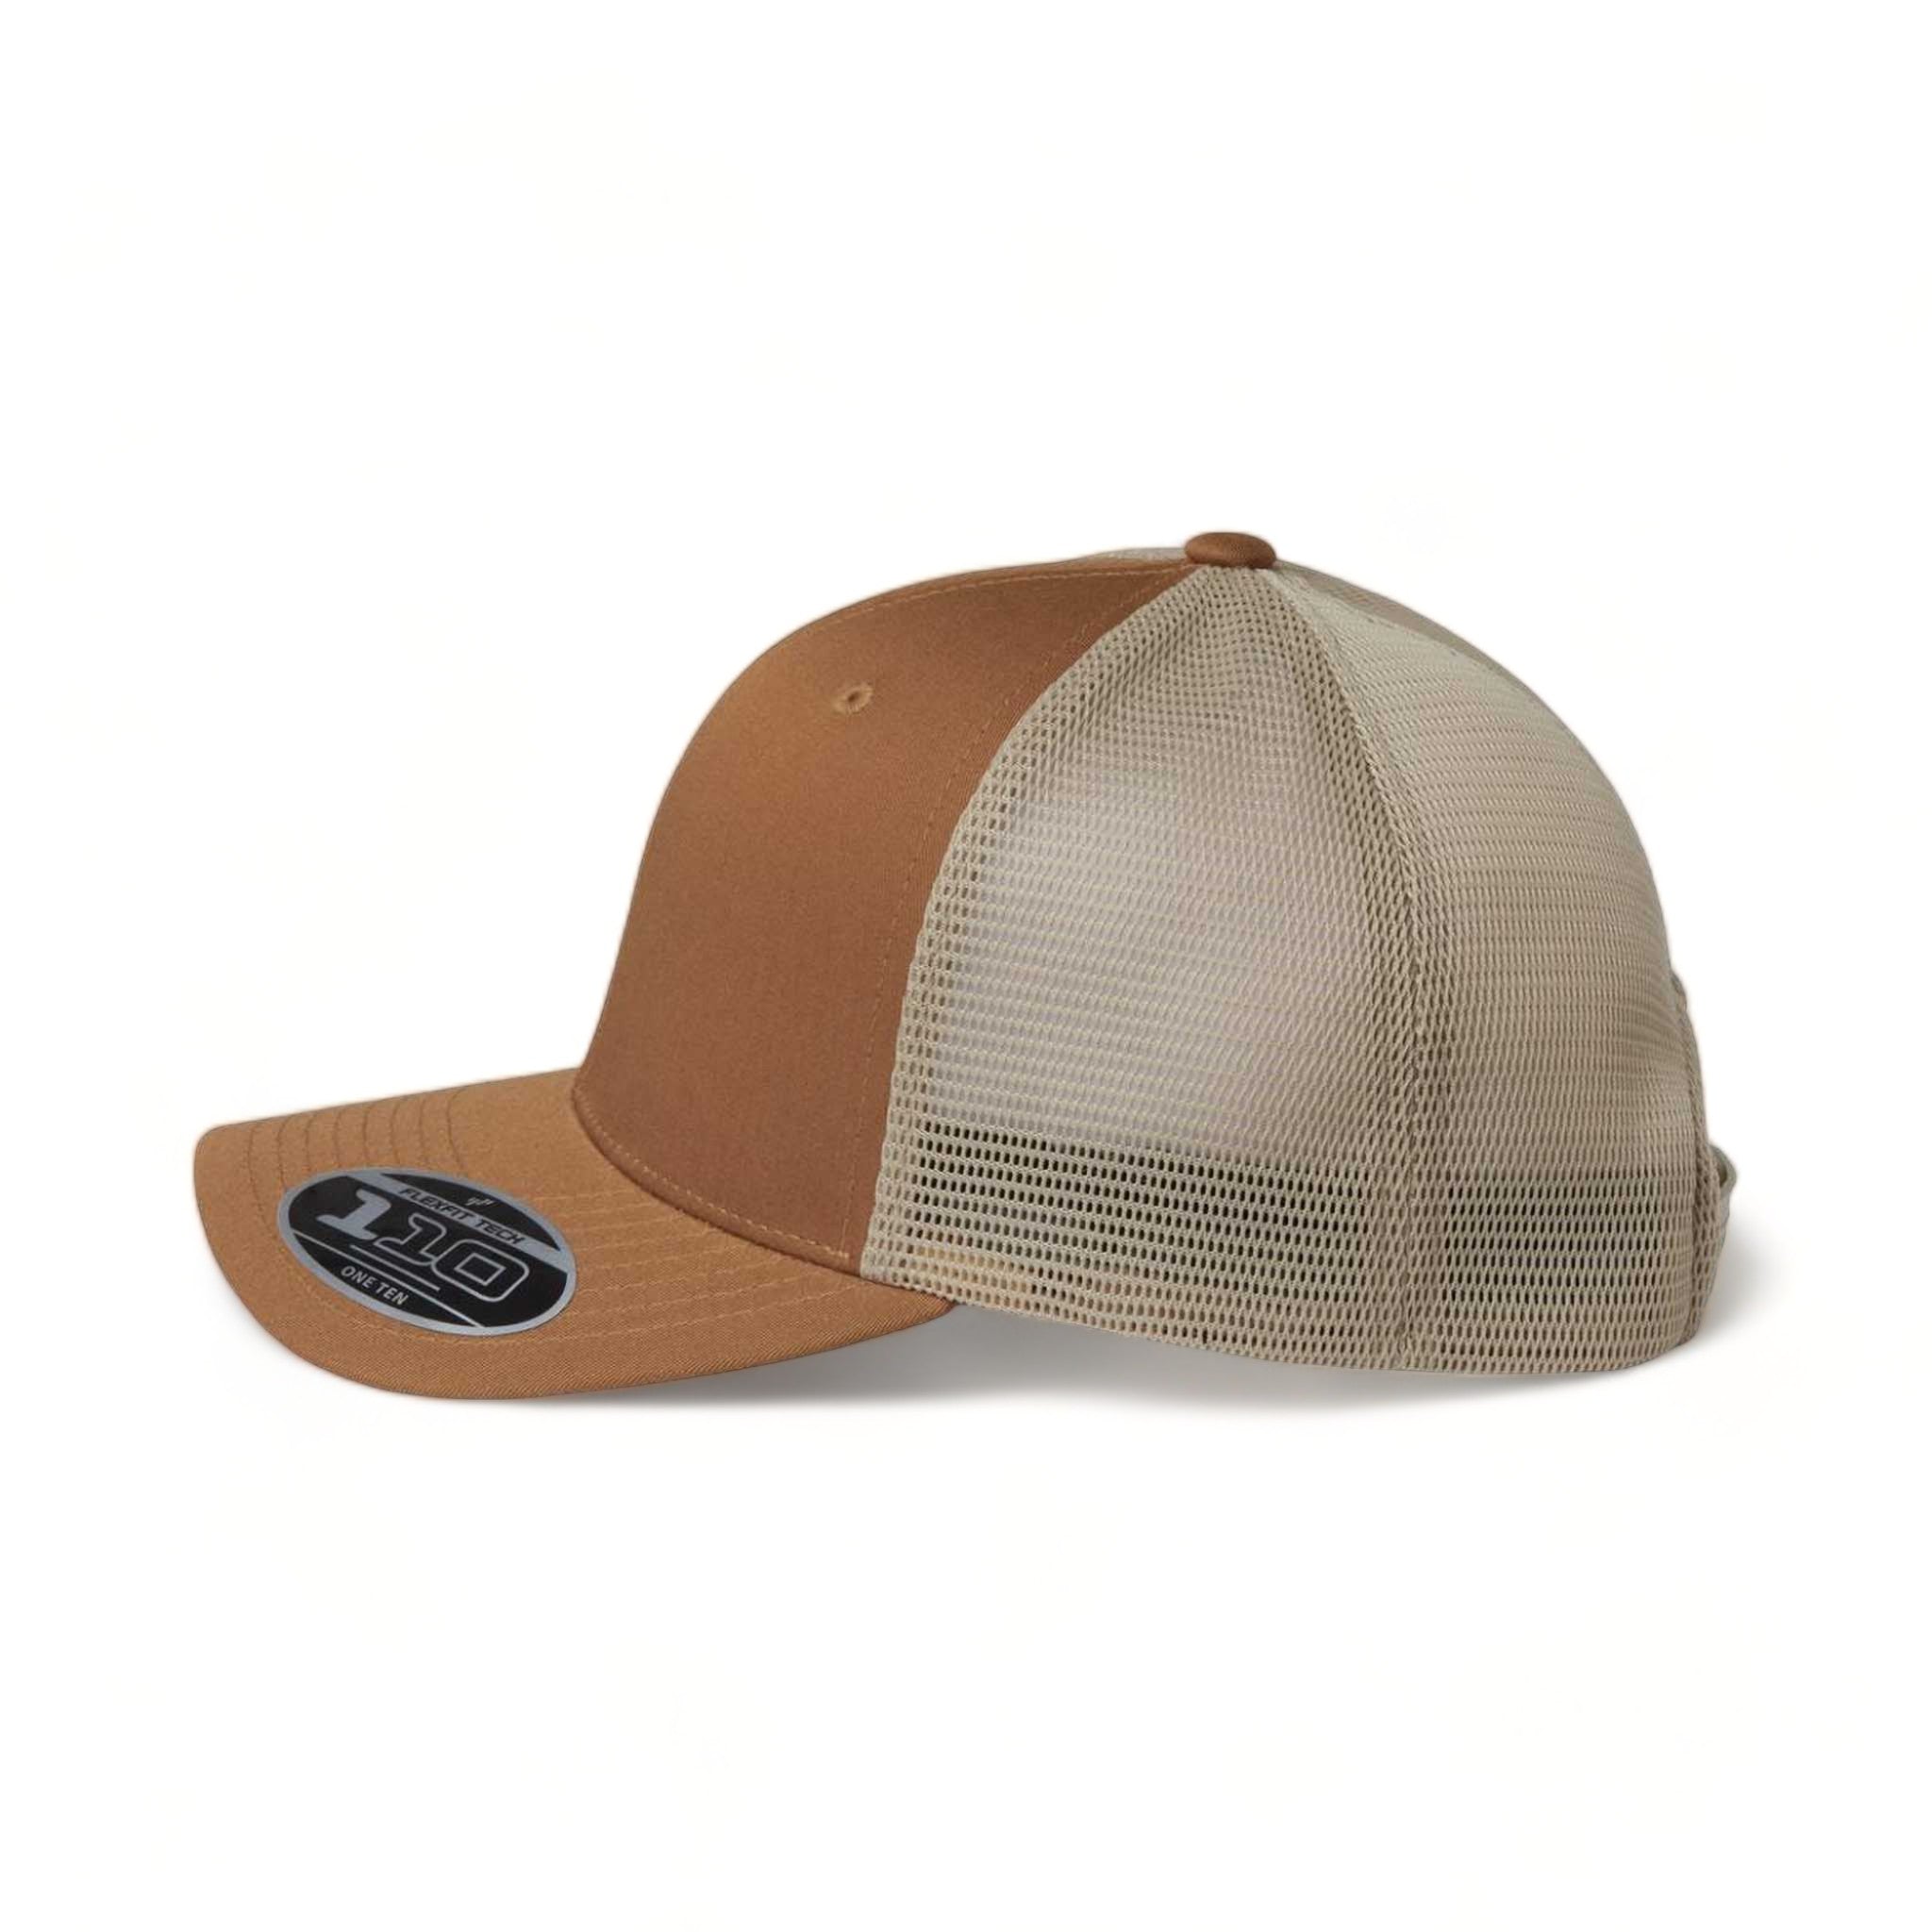 Side view of Flexfit 110M custom hat in caramel and khaki